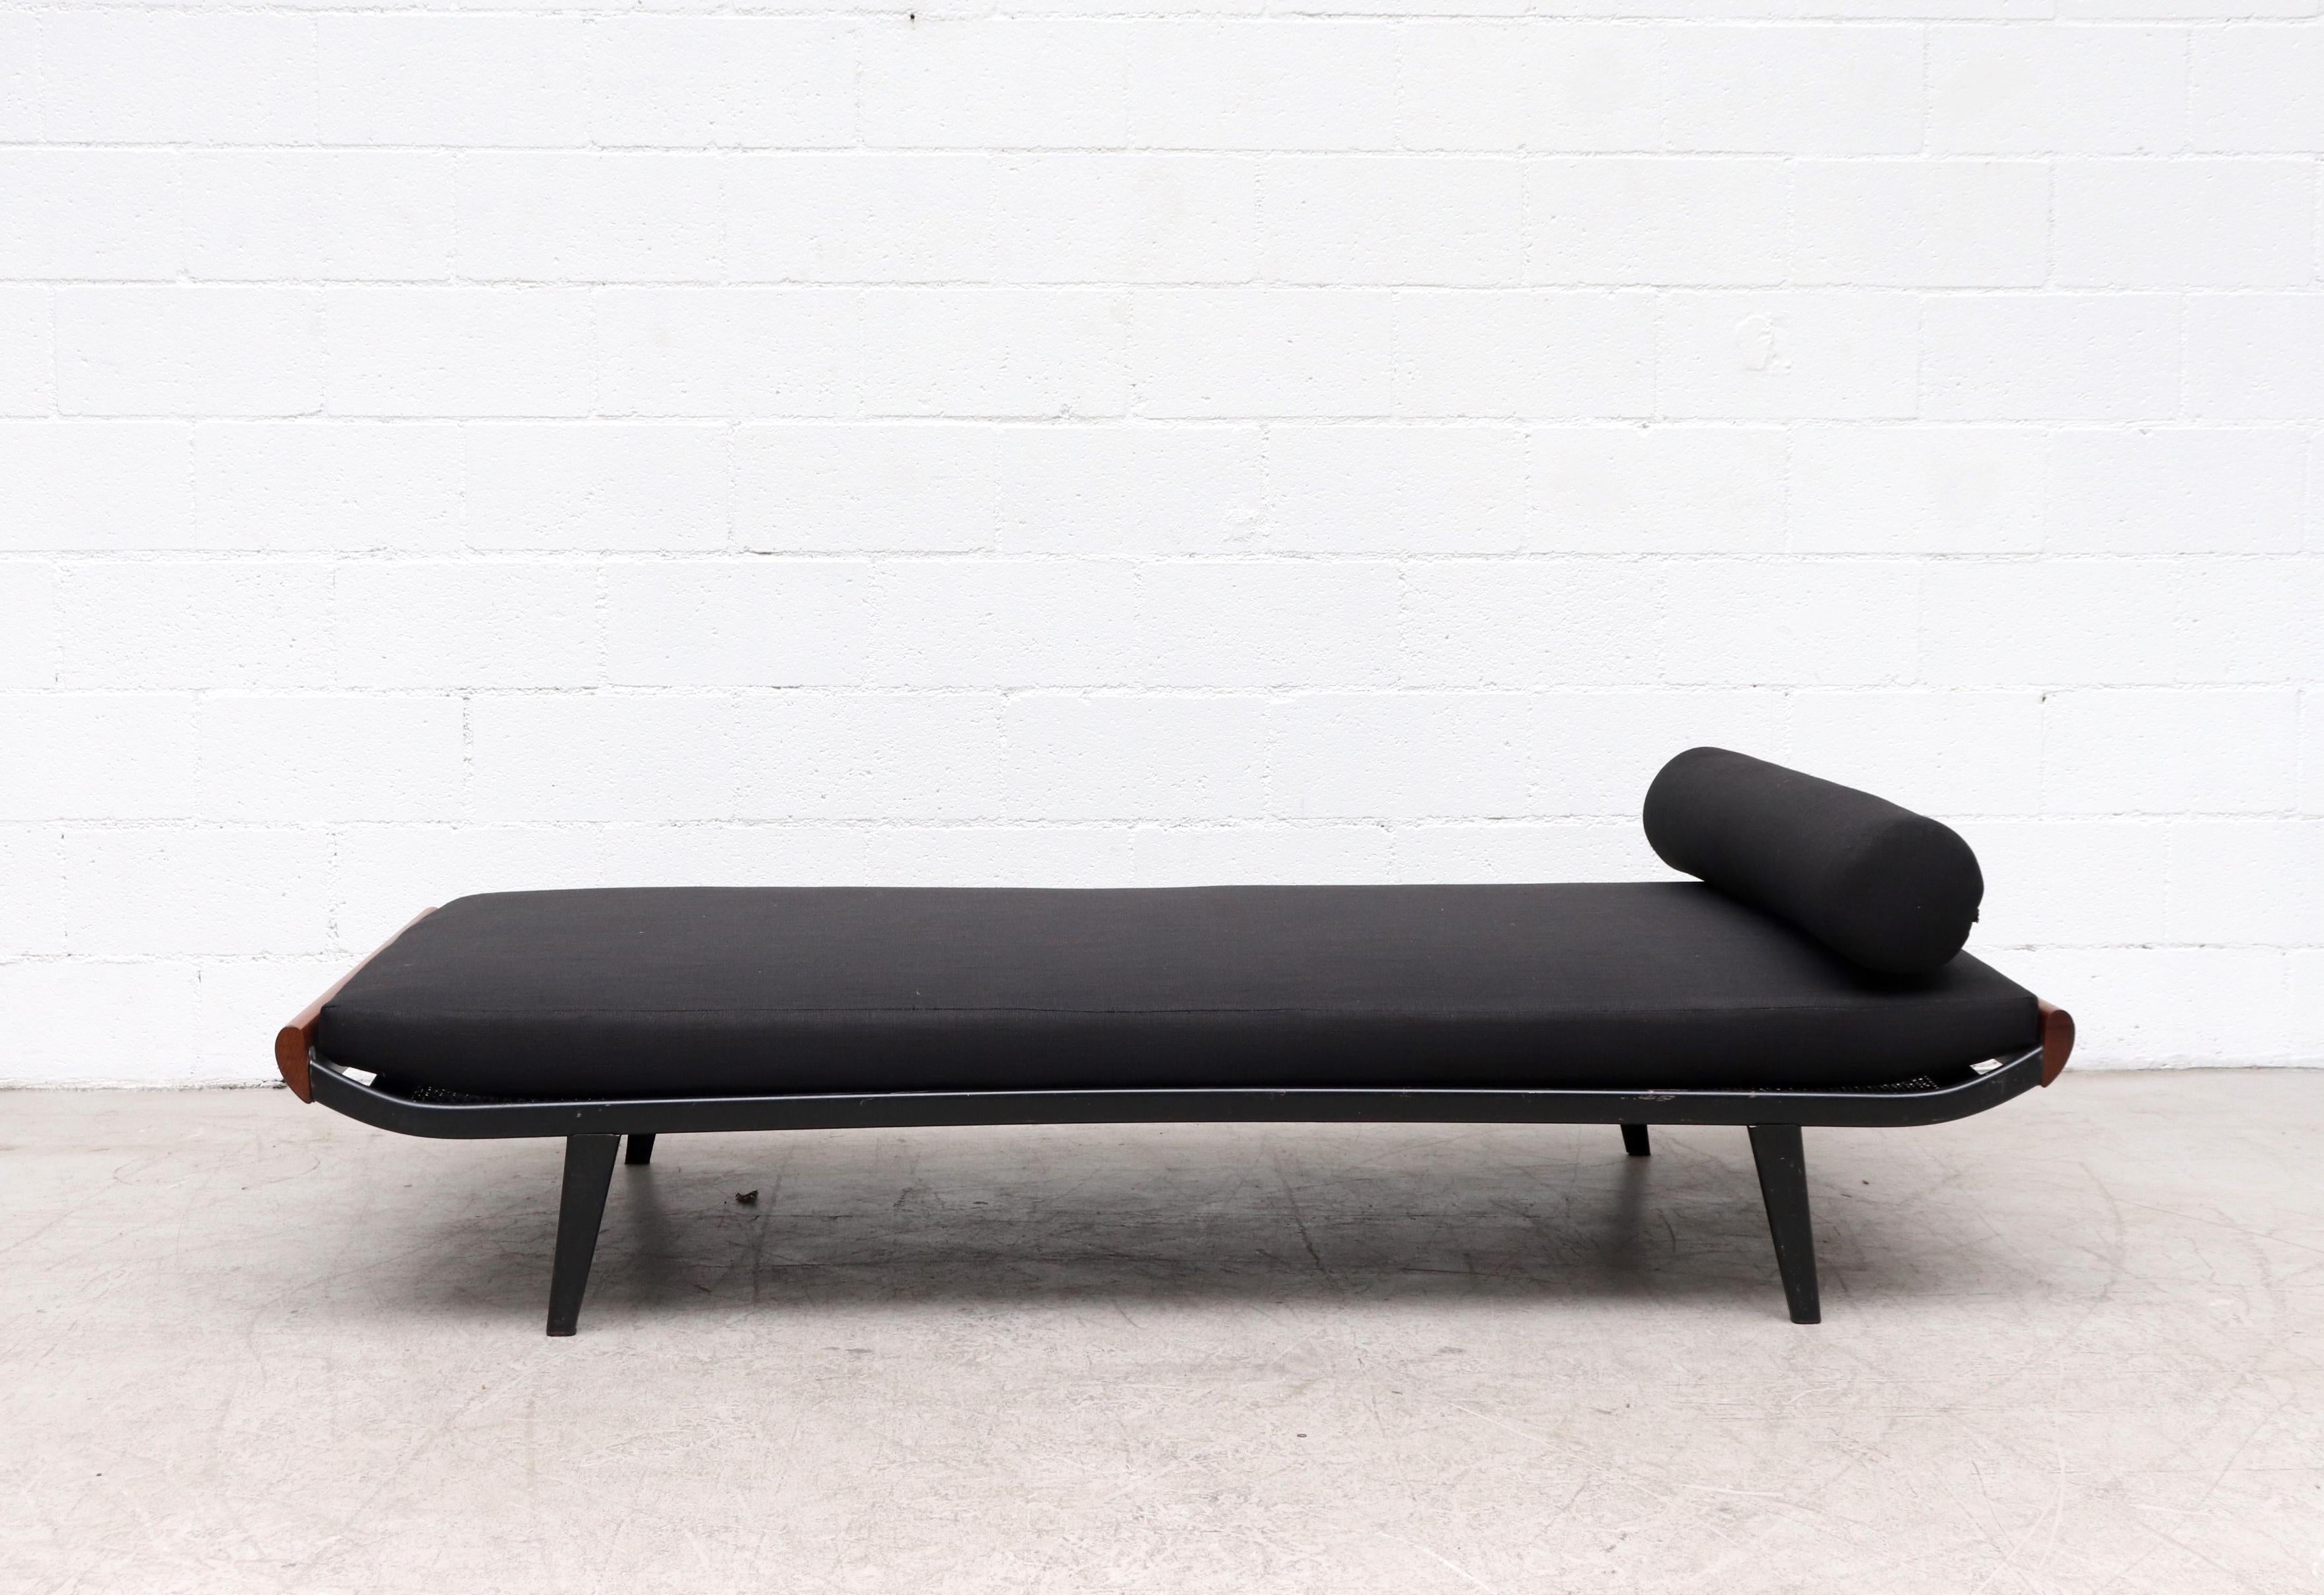 1960s Cleopatra daybed by A.R. Cordemeyer. Teak wood ends with dark grey enameled metal frame and most have 